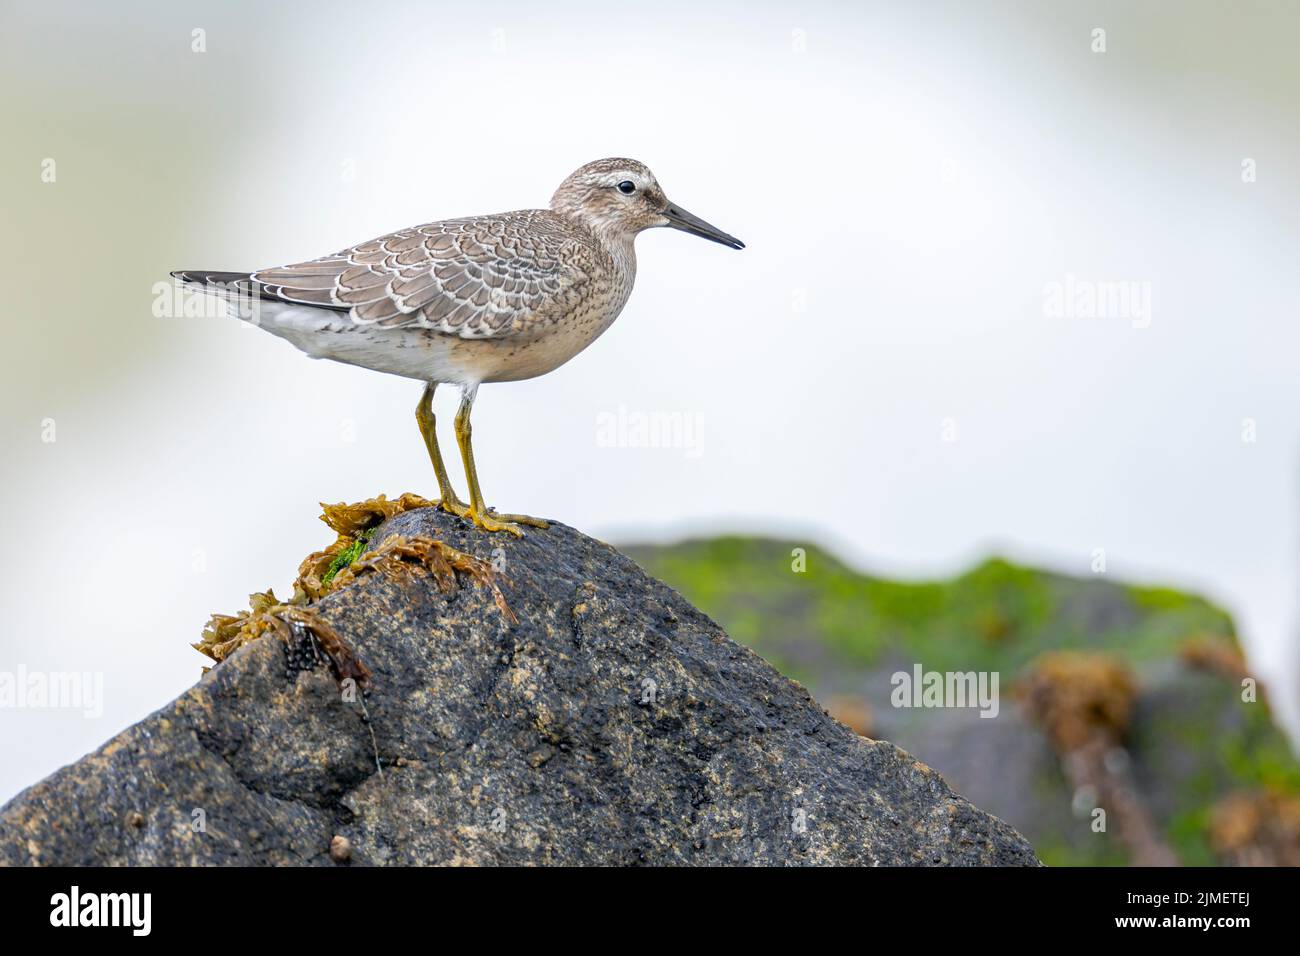 A Red Knot in the transition plumage summer-winter stands on a rock / Calidris canutus Stock Photo